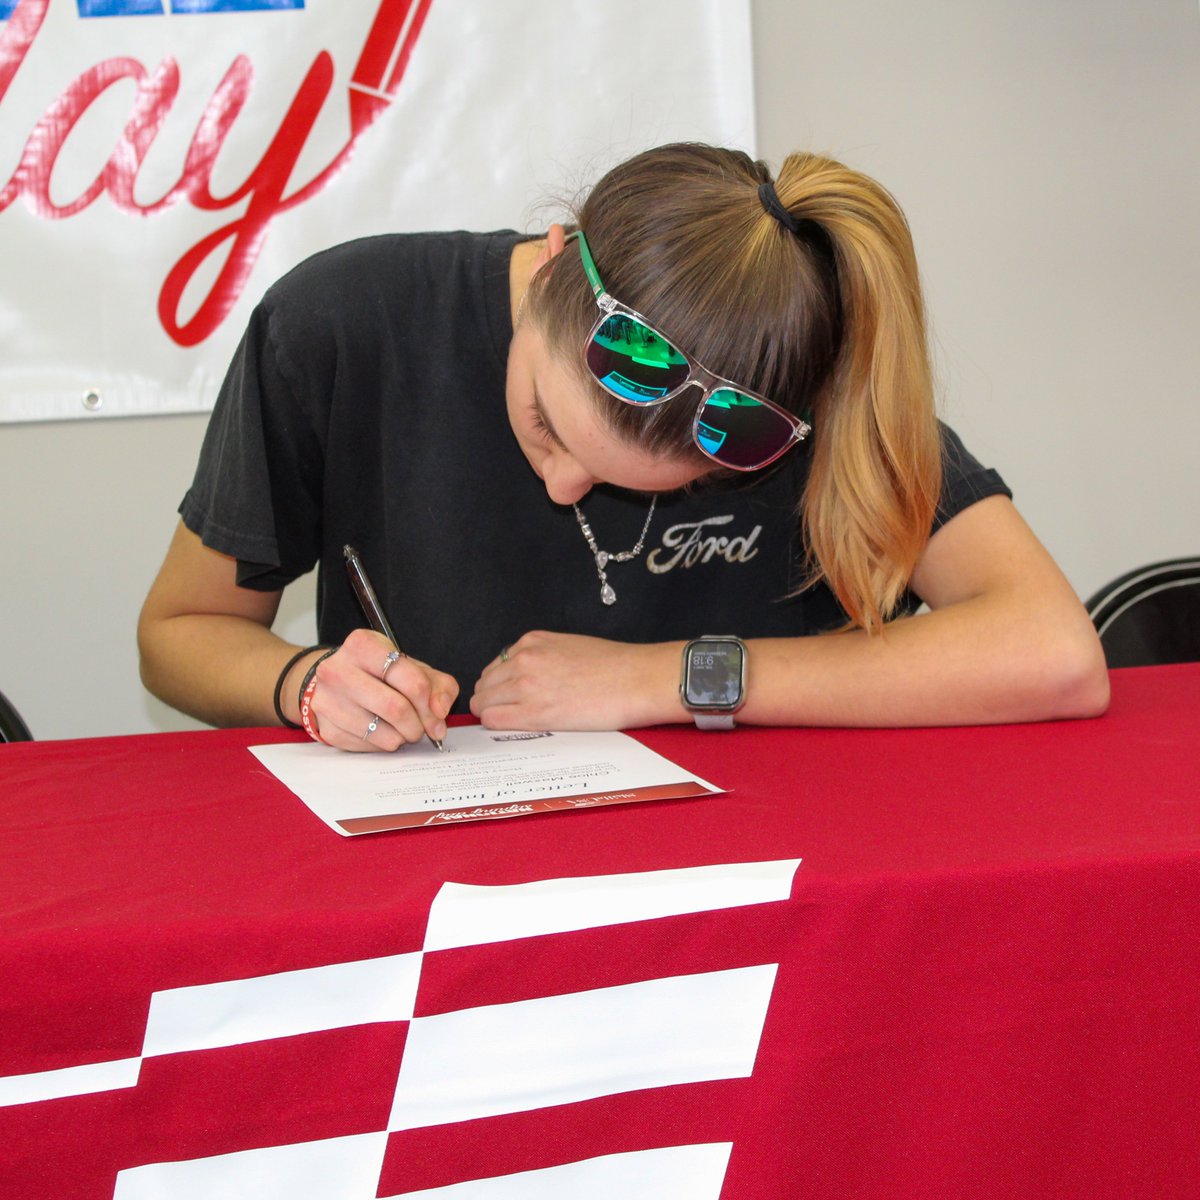 Nearly 50 @QuestarIII #BOCES Career and Technical Education students participated in the @SkillsUSA National Signing Day, celebrating securing post-graduation employment. Learn more: questar.org/2024/05/13/nea… #QuestarIII #CTE #MadeInSkillsUSA #CareerTechEd #SigningDay